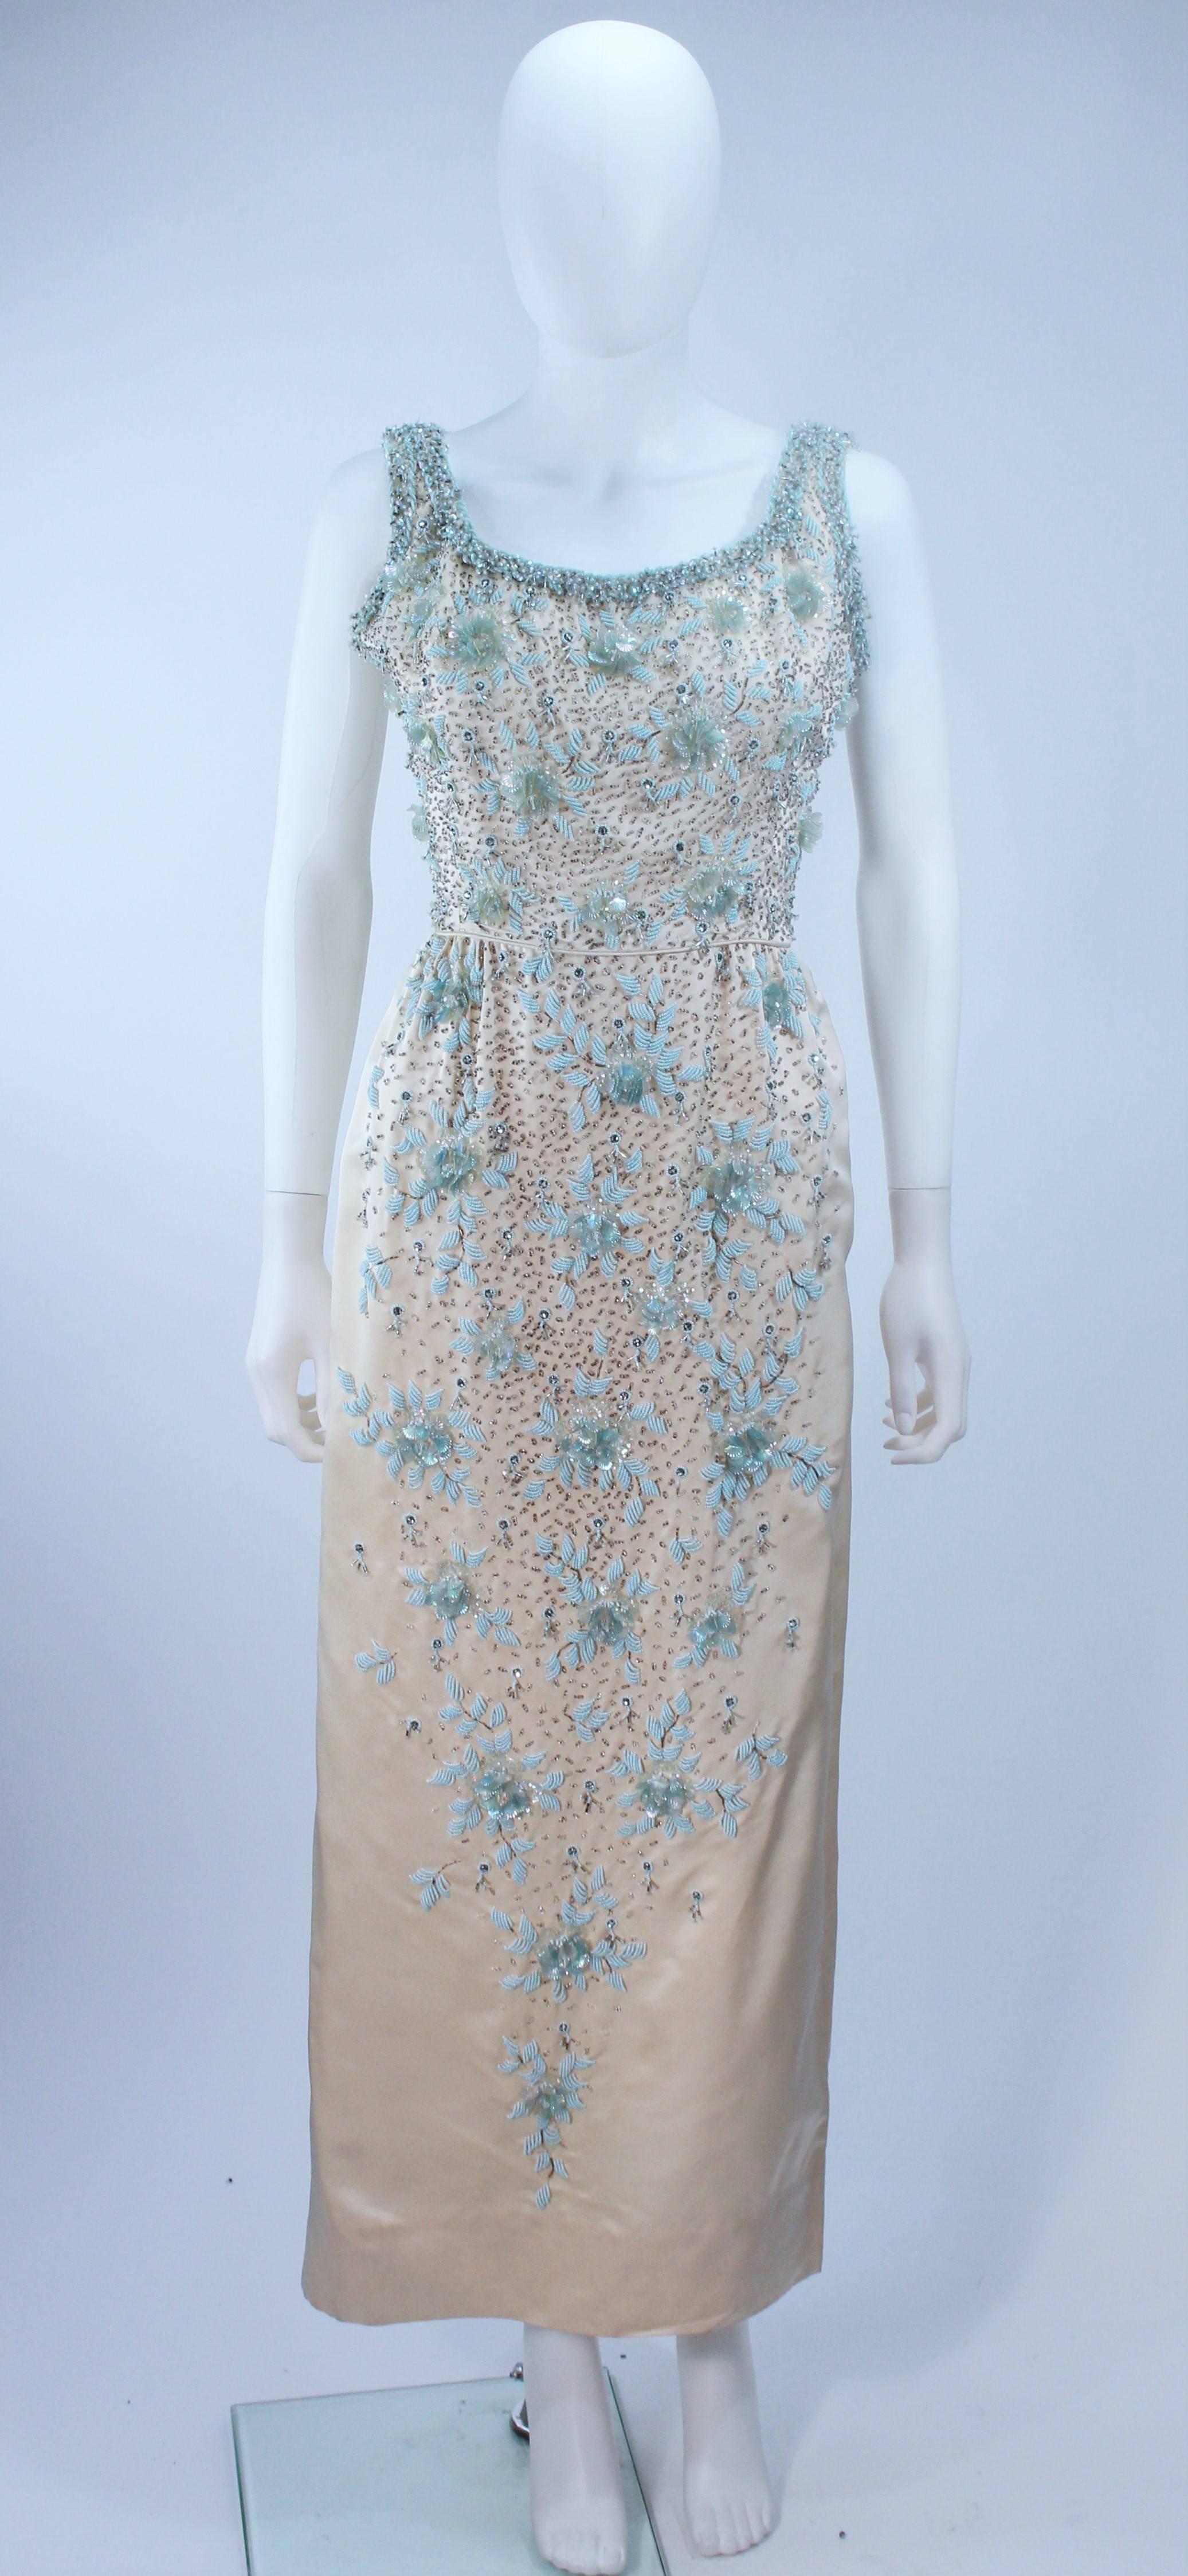  This gown is composed of a creme silk with blue floral relief beading with silver. This classic style has a center back zipper closure. In excellent vintage condition.

  **Please cross-reference measurements for personal accuracy. 

Measures